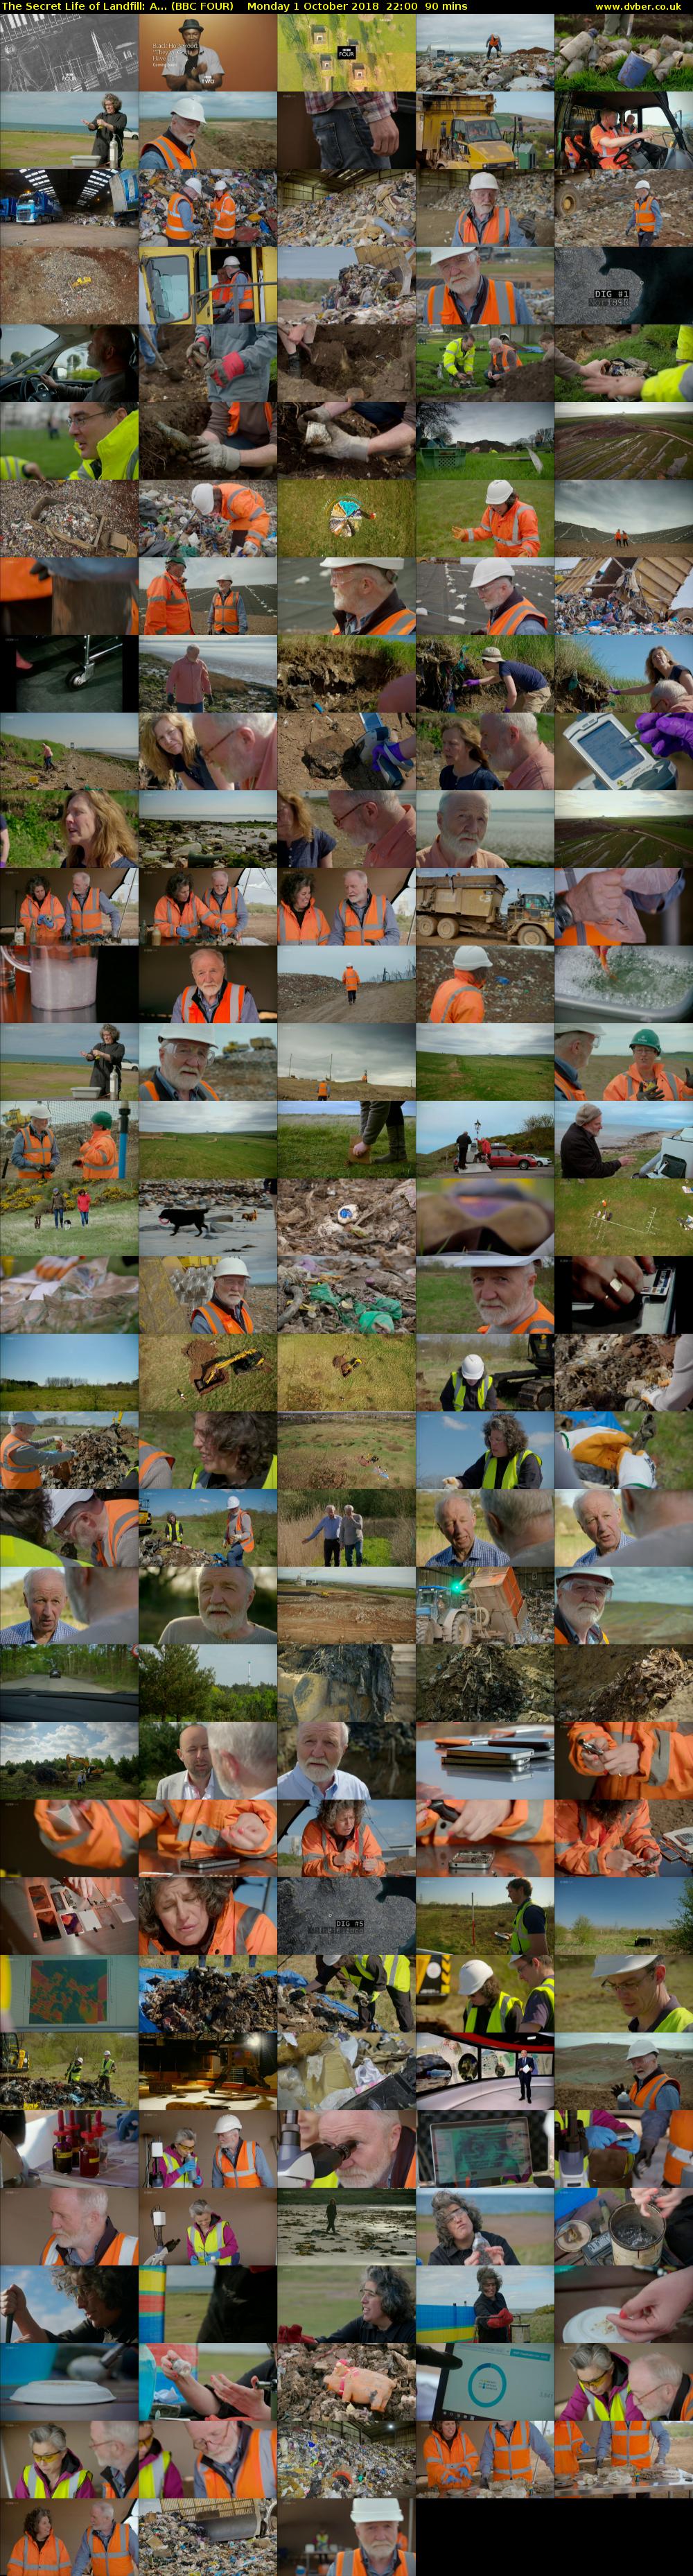 The Secret Life of Landfill: A... (BBC FOUR) Monday 1 October 2018 22:00 - 23:30